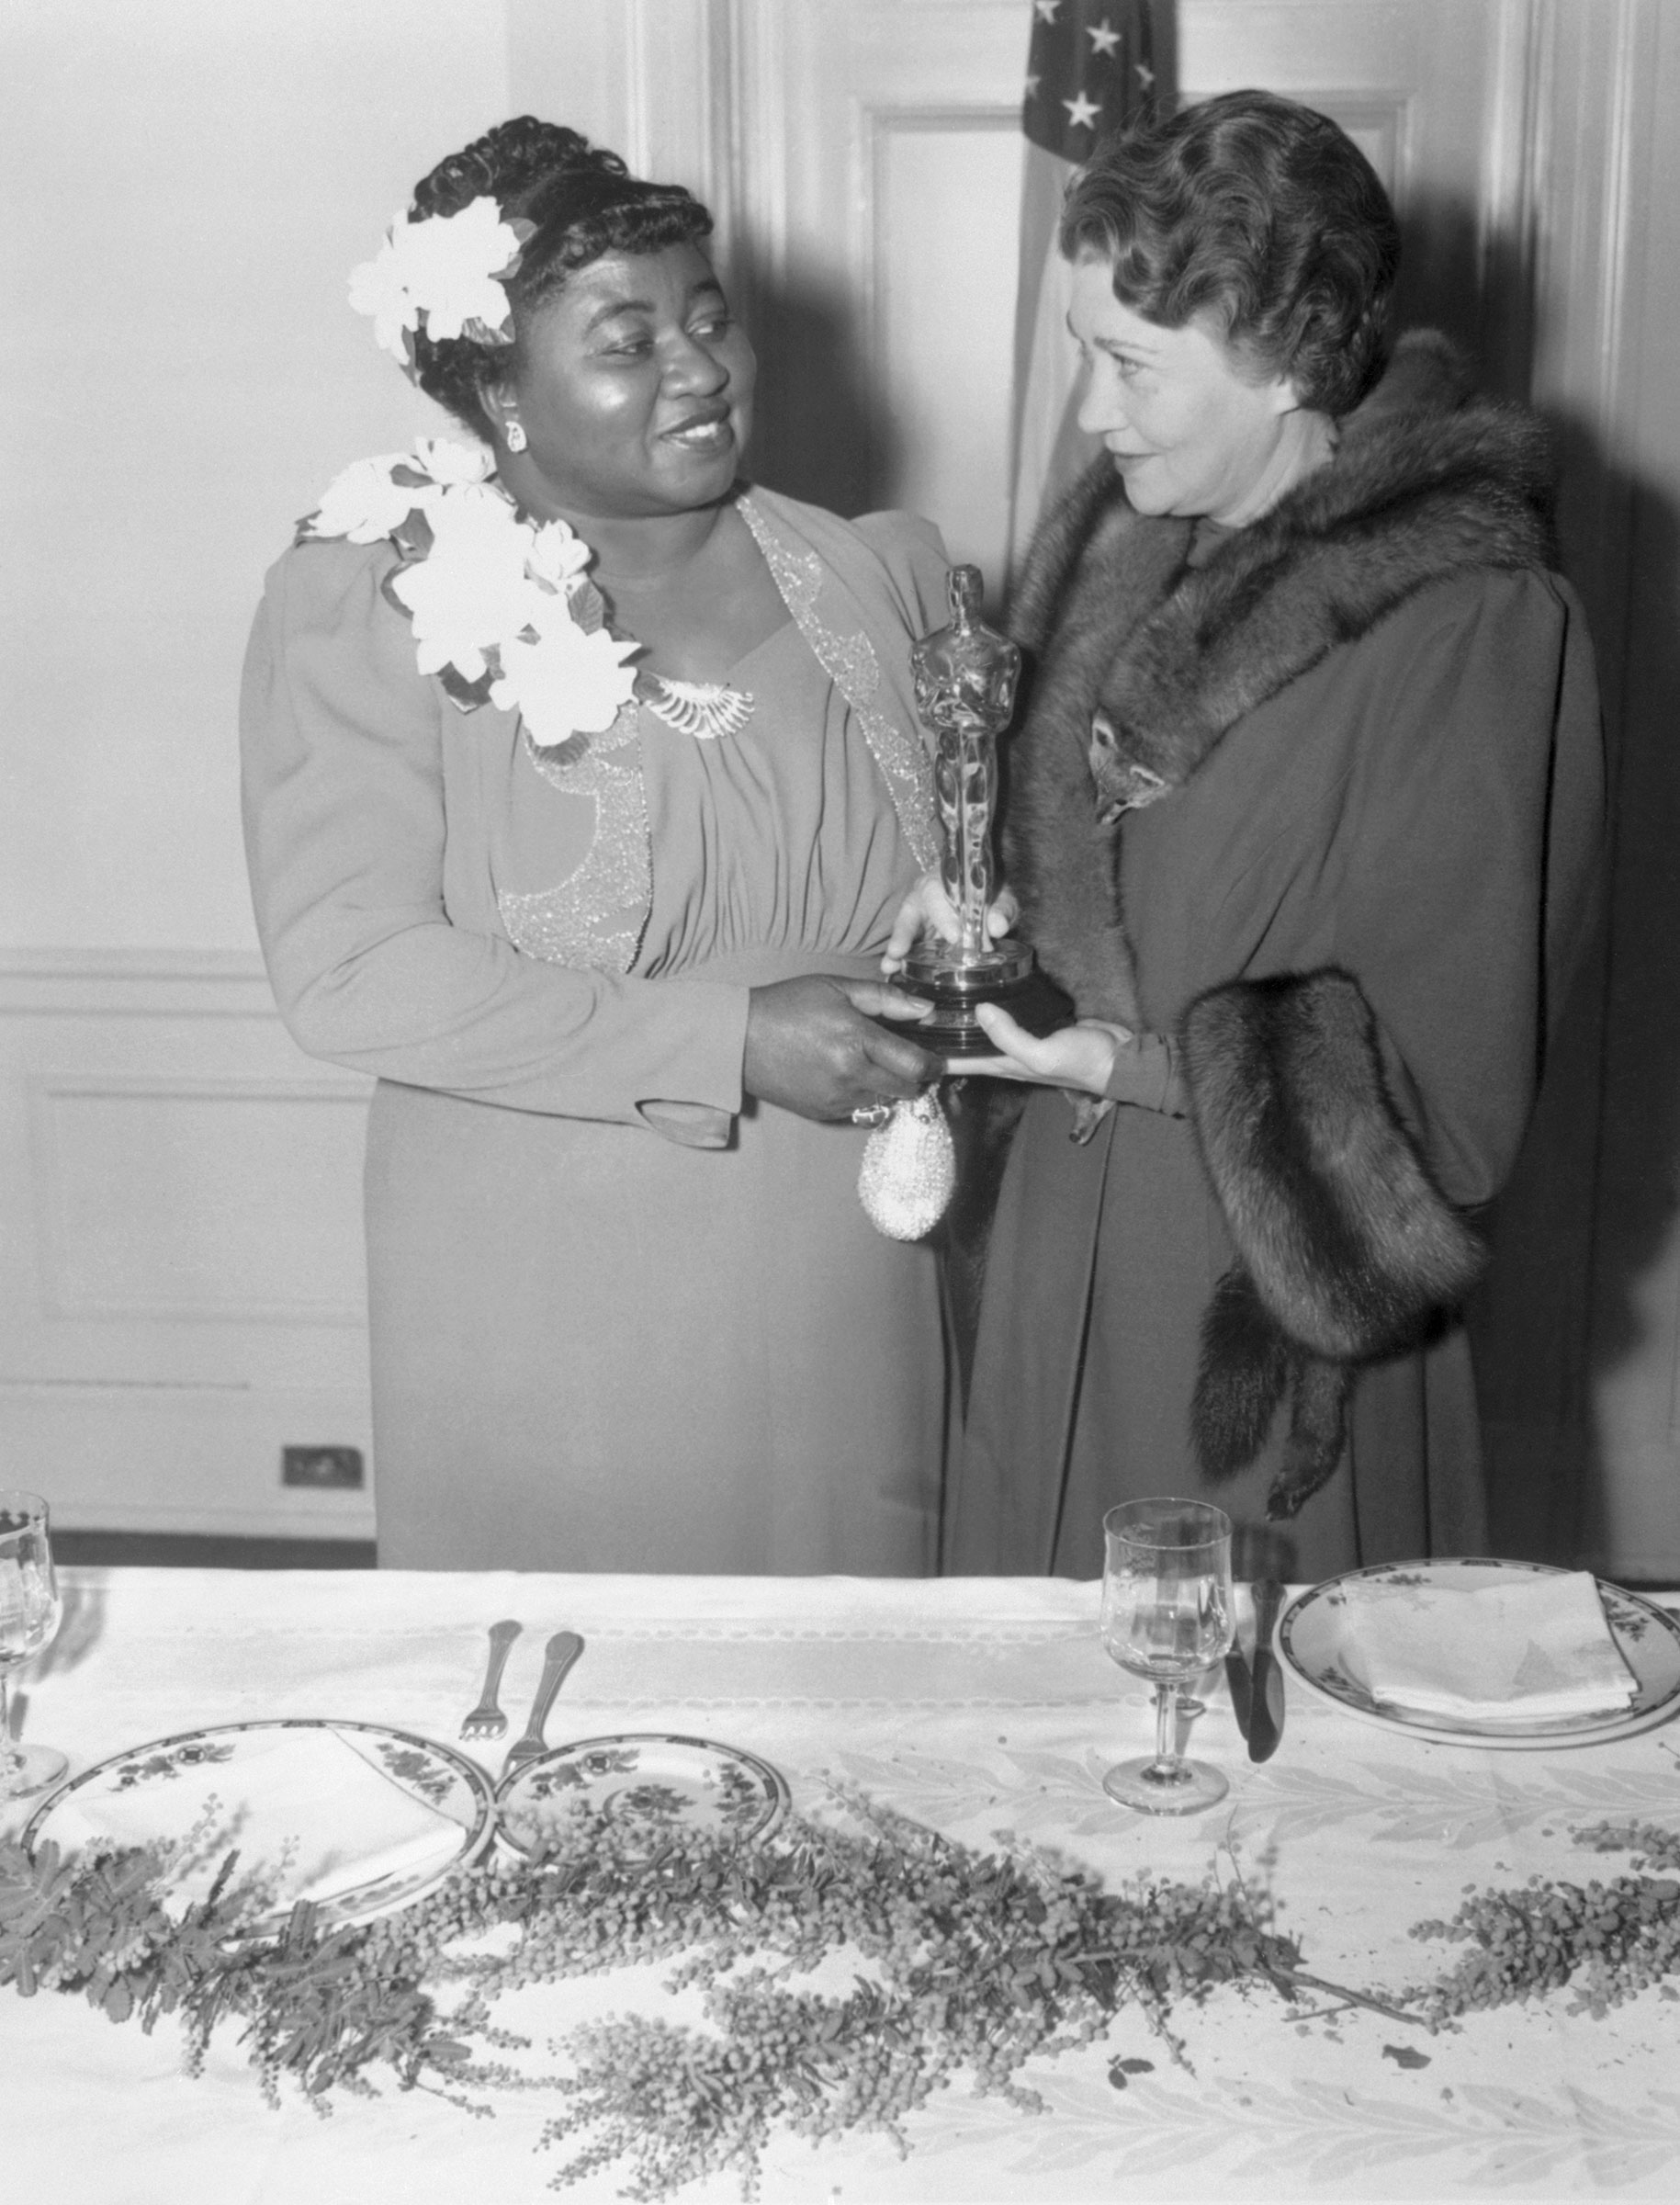 Hattie McDaniel accepts the Oscar, presented to her by Fay Bainter, for her supporting role in Gone With the Wind at the Twelfth Annual Banquet of the Academy of Motion Picture Arts and Sciences on Feb. 29, 1940.